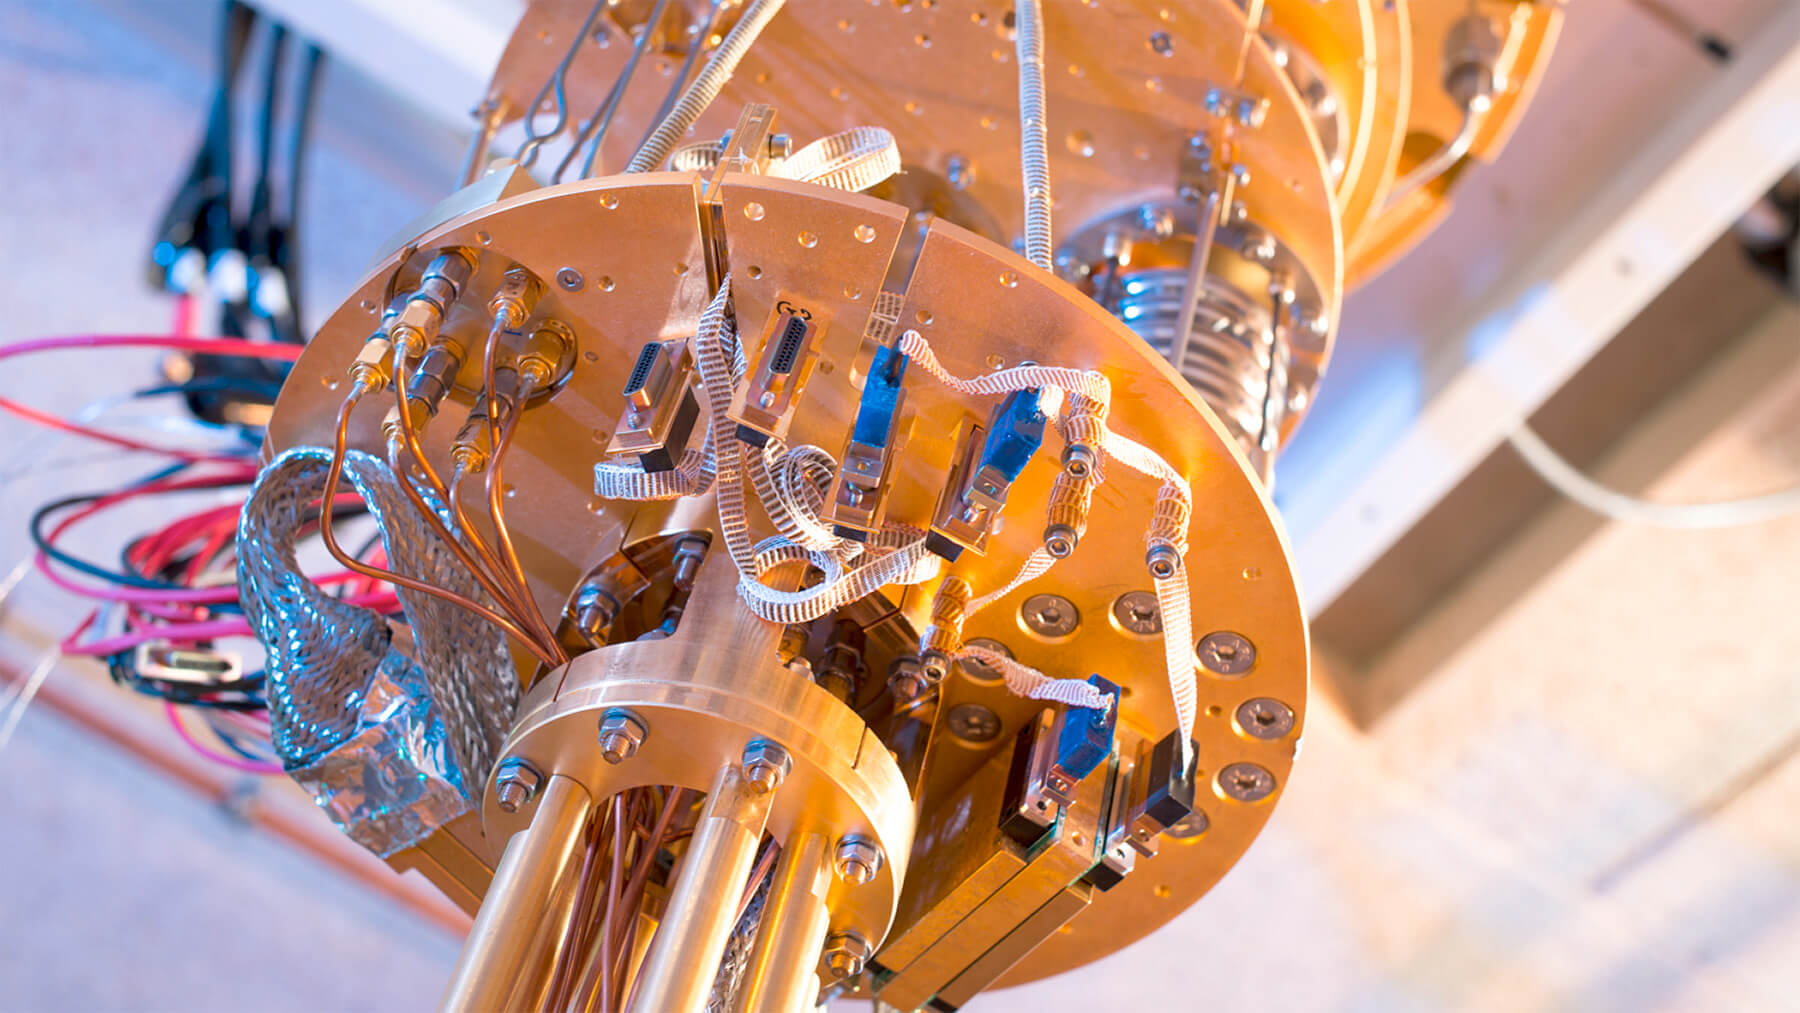 Quantum Technology: The Netherlands Invests in Tomorrow’s Tech Today